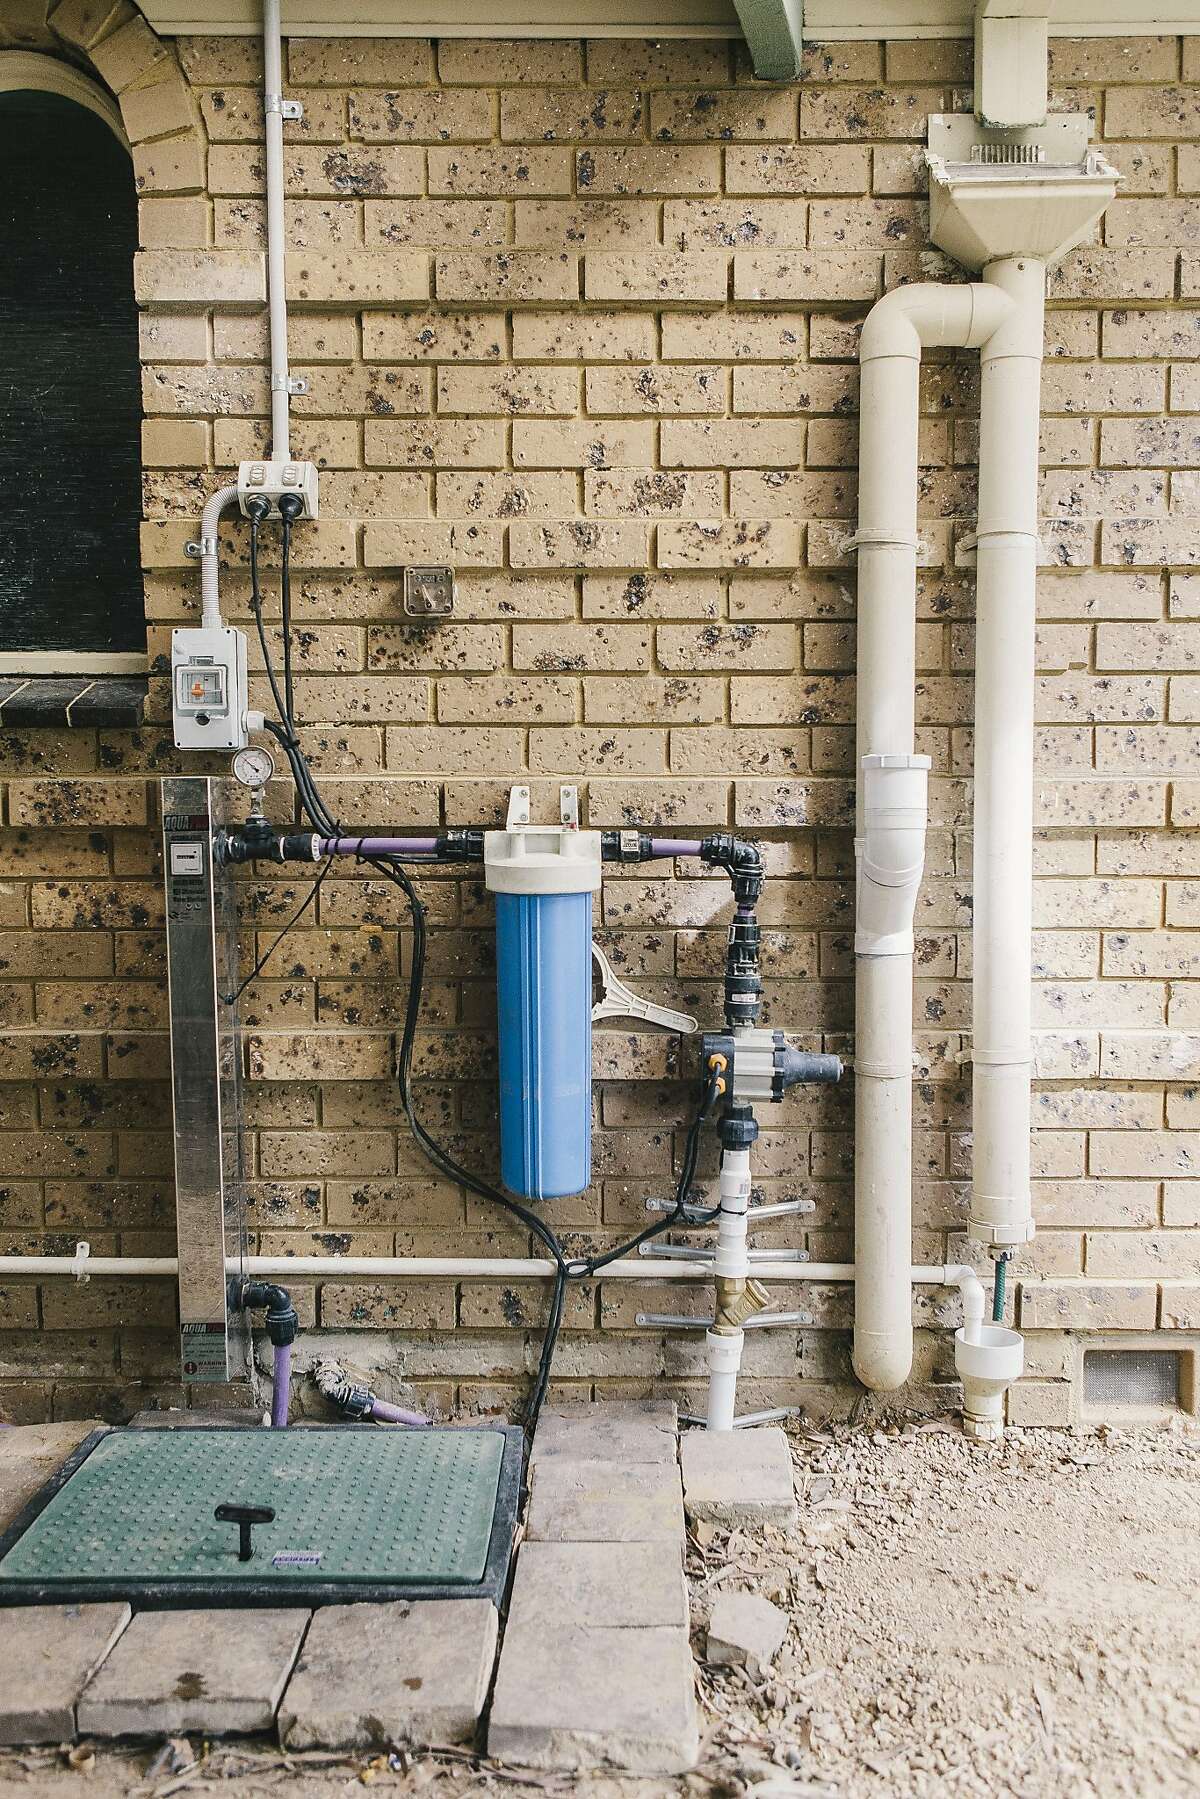 John Harvey, 75, a retired Melbourne homeowner, installed an impressive array of recycling and gray-water systems that have cut his water bill to zero.